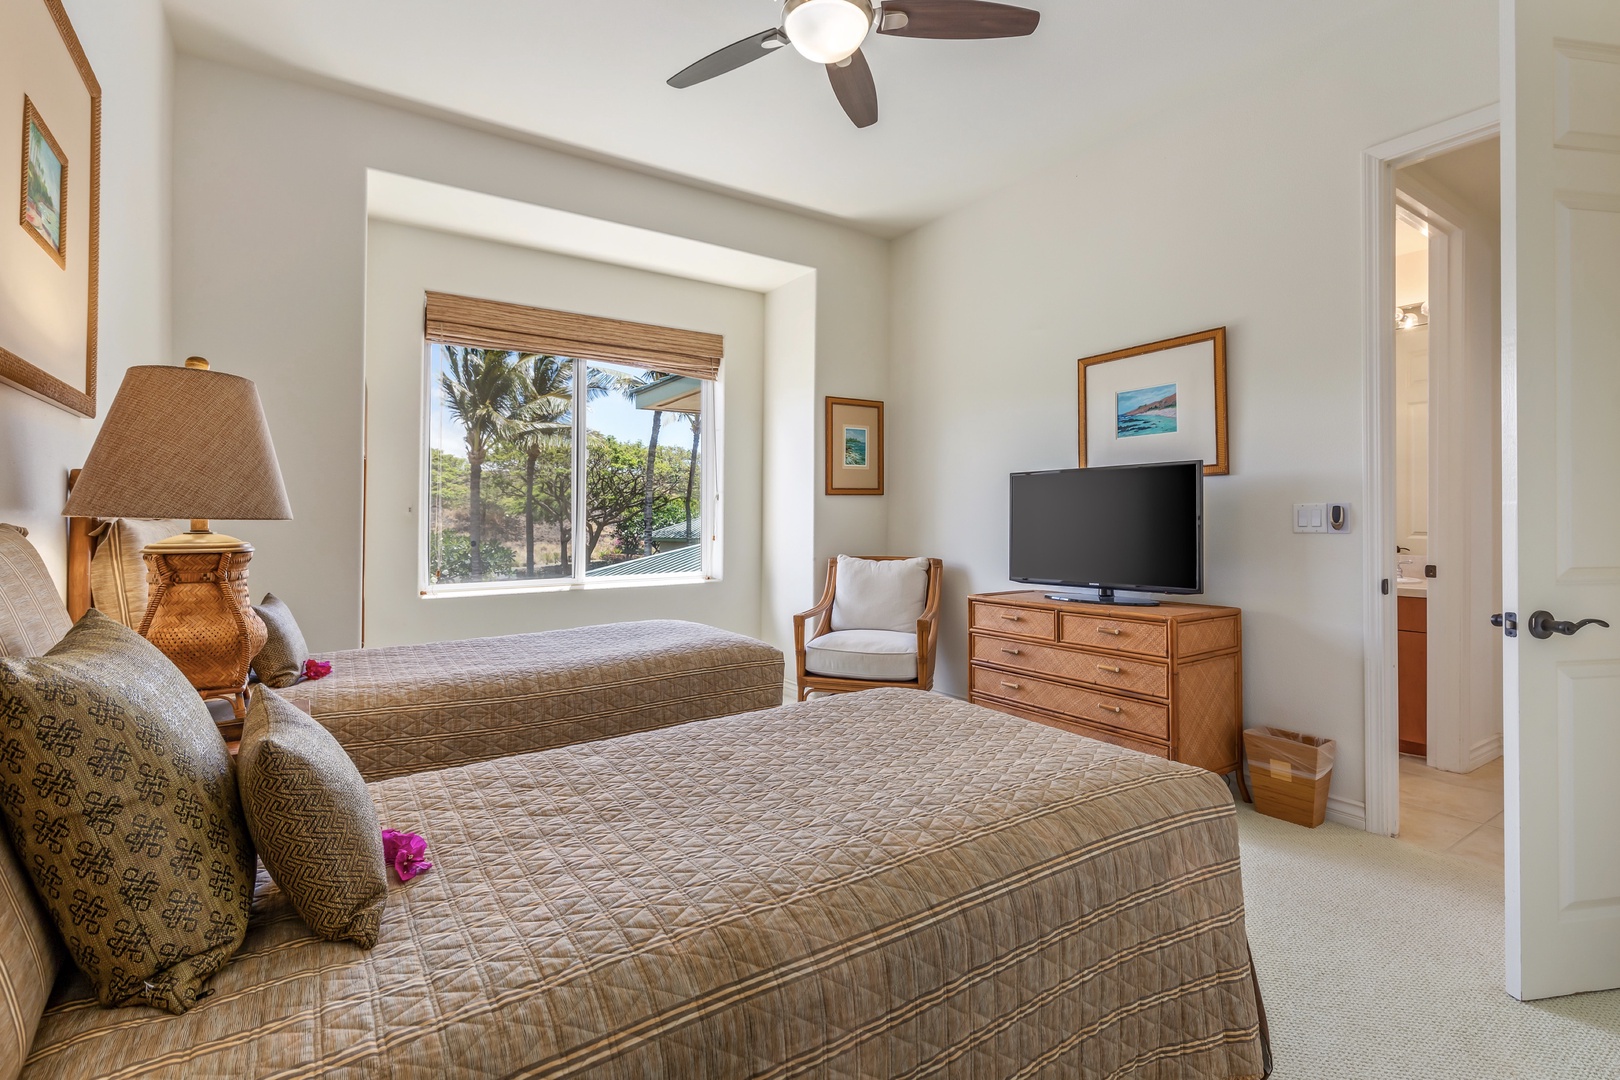 Kamuela Vacation Rentals, 2BD Kumulani (I-4) at Mauna Kea Resort - Guest bedroom with two twin beds (can convert to a king upon request) and
mountain views.